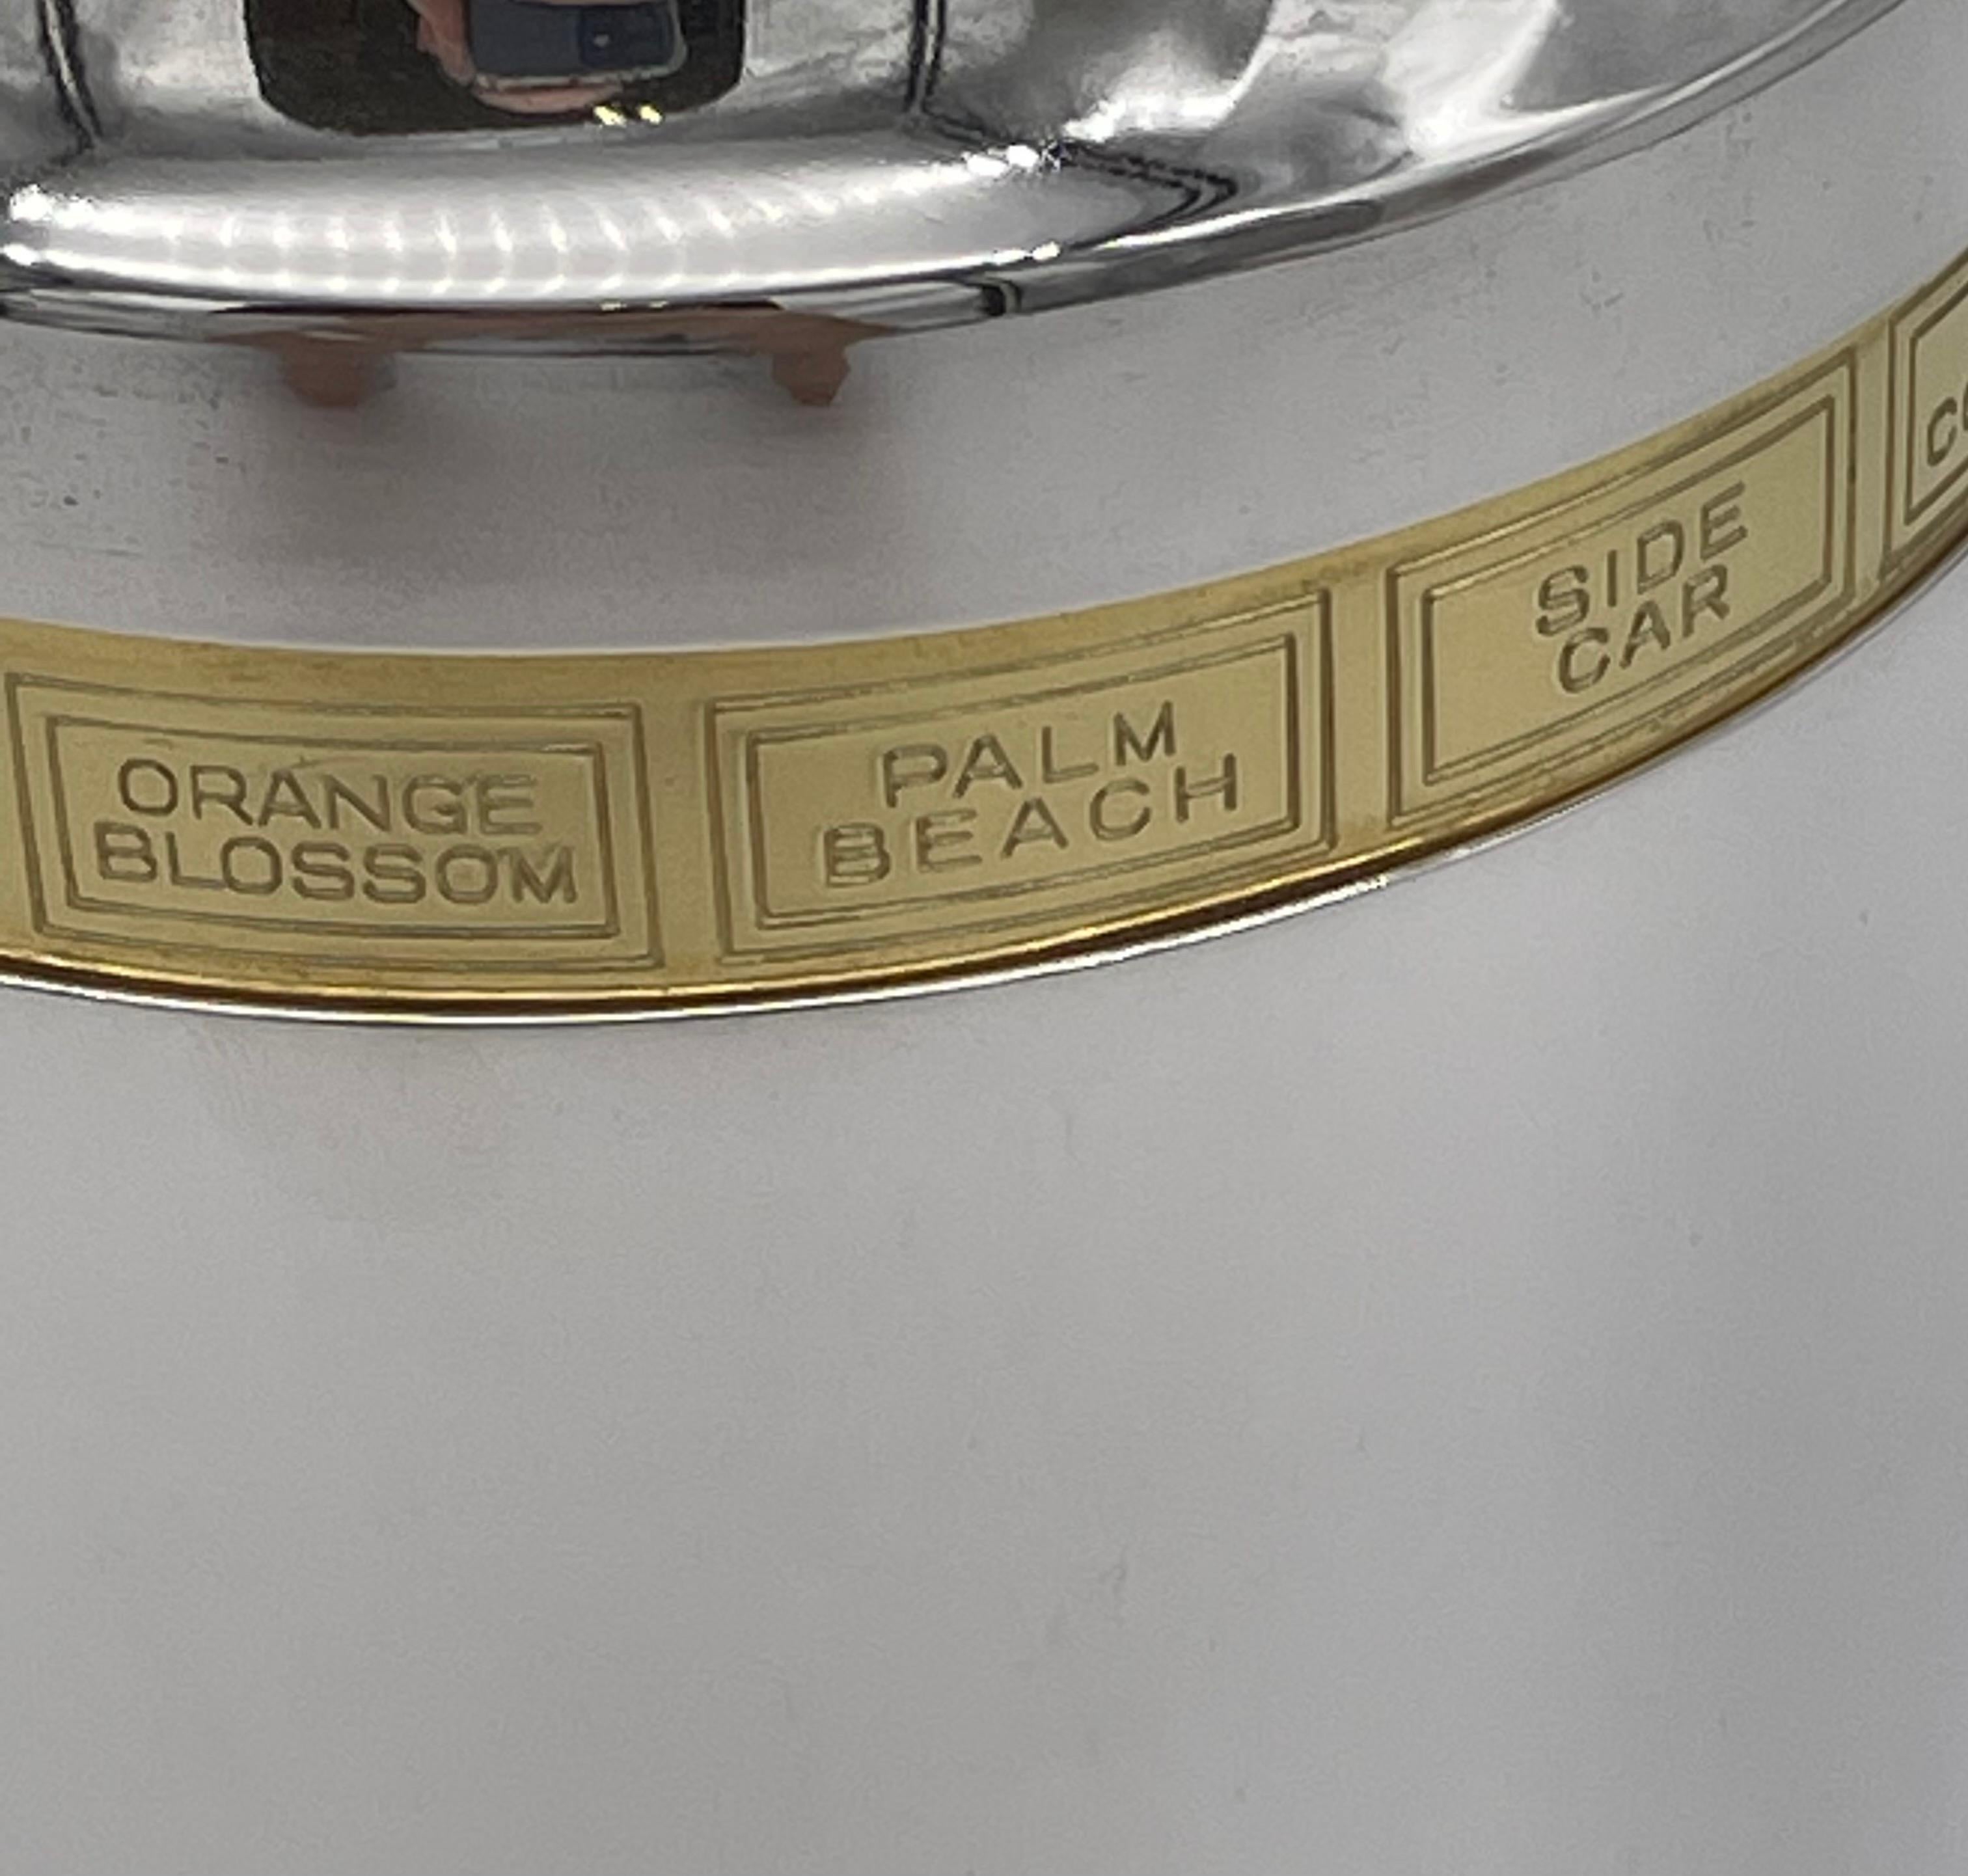 This is the classic silver-plated recipe cocktail shaker, first designed in the USA in 1933, and made in England from 1935.
The upper part of the shaker turns and an arrow points to one of many possible cocktails engraved on the inner rim. The